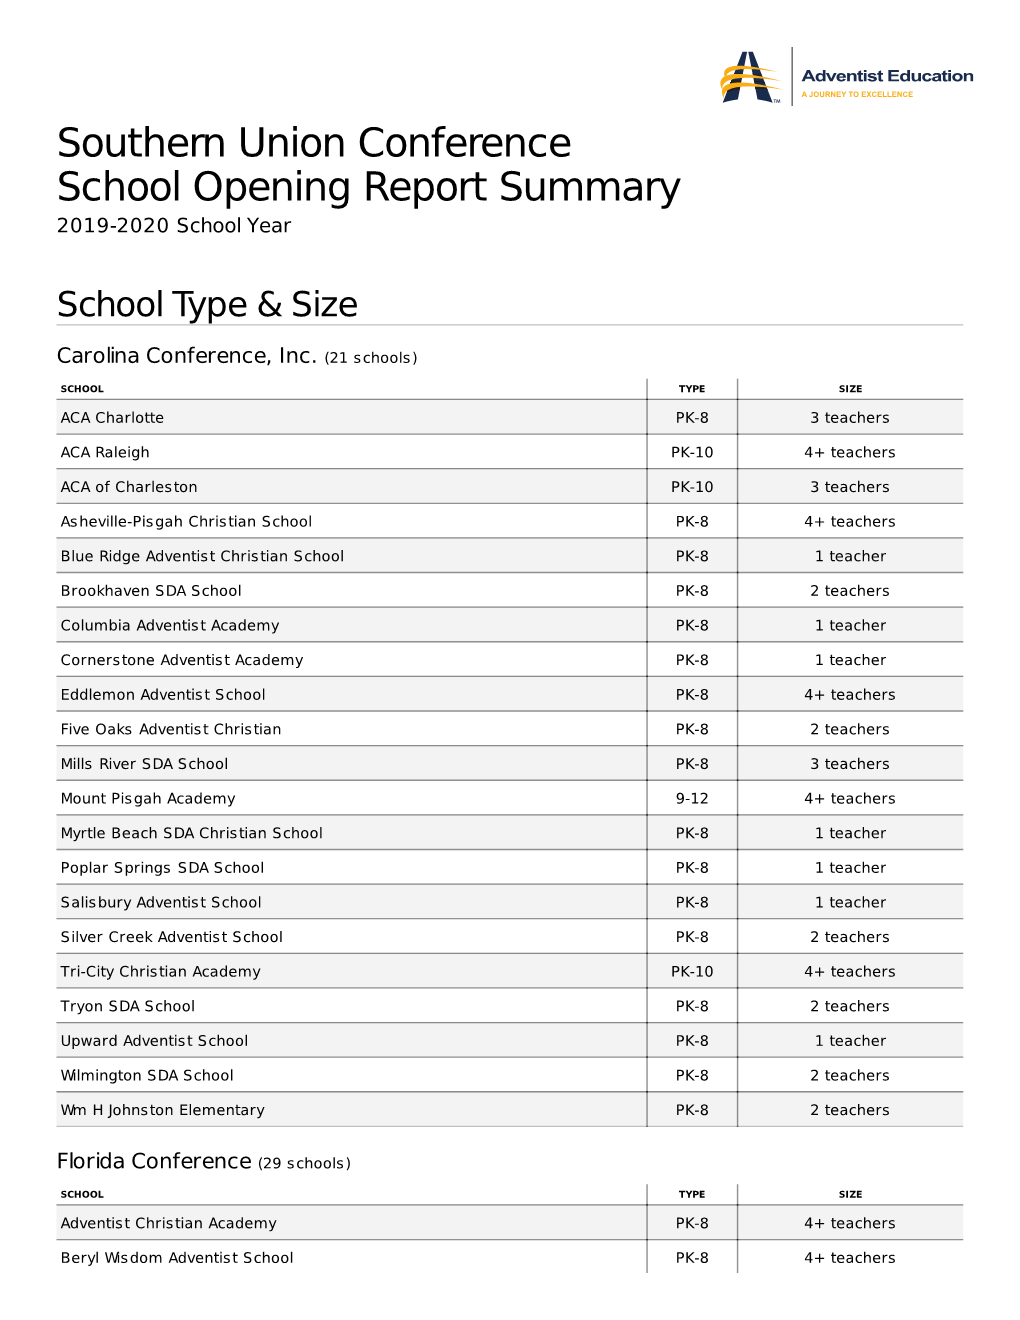 Southern Union Conference School Opening Report Summary 2019-2020 School Year